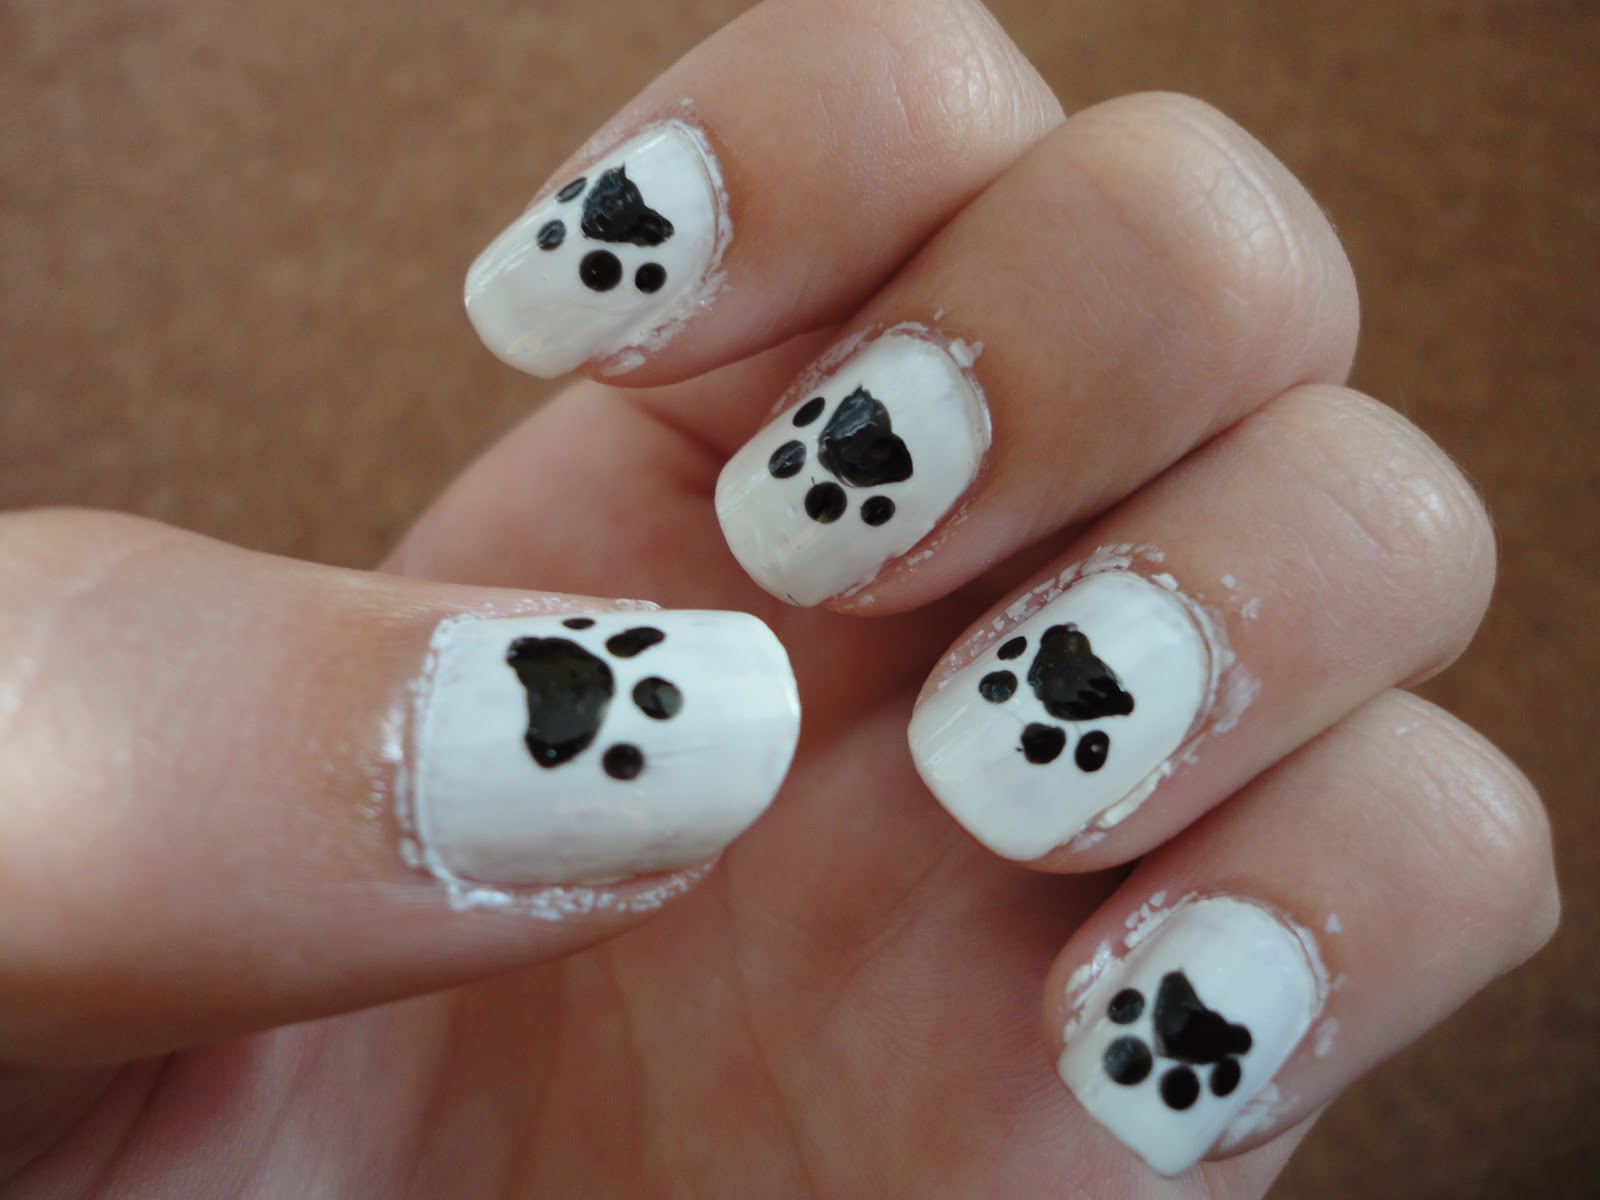 2. Adorable Puppy Paw Print Nail Art - wide 4